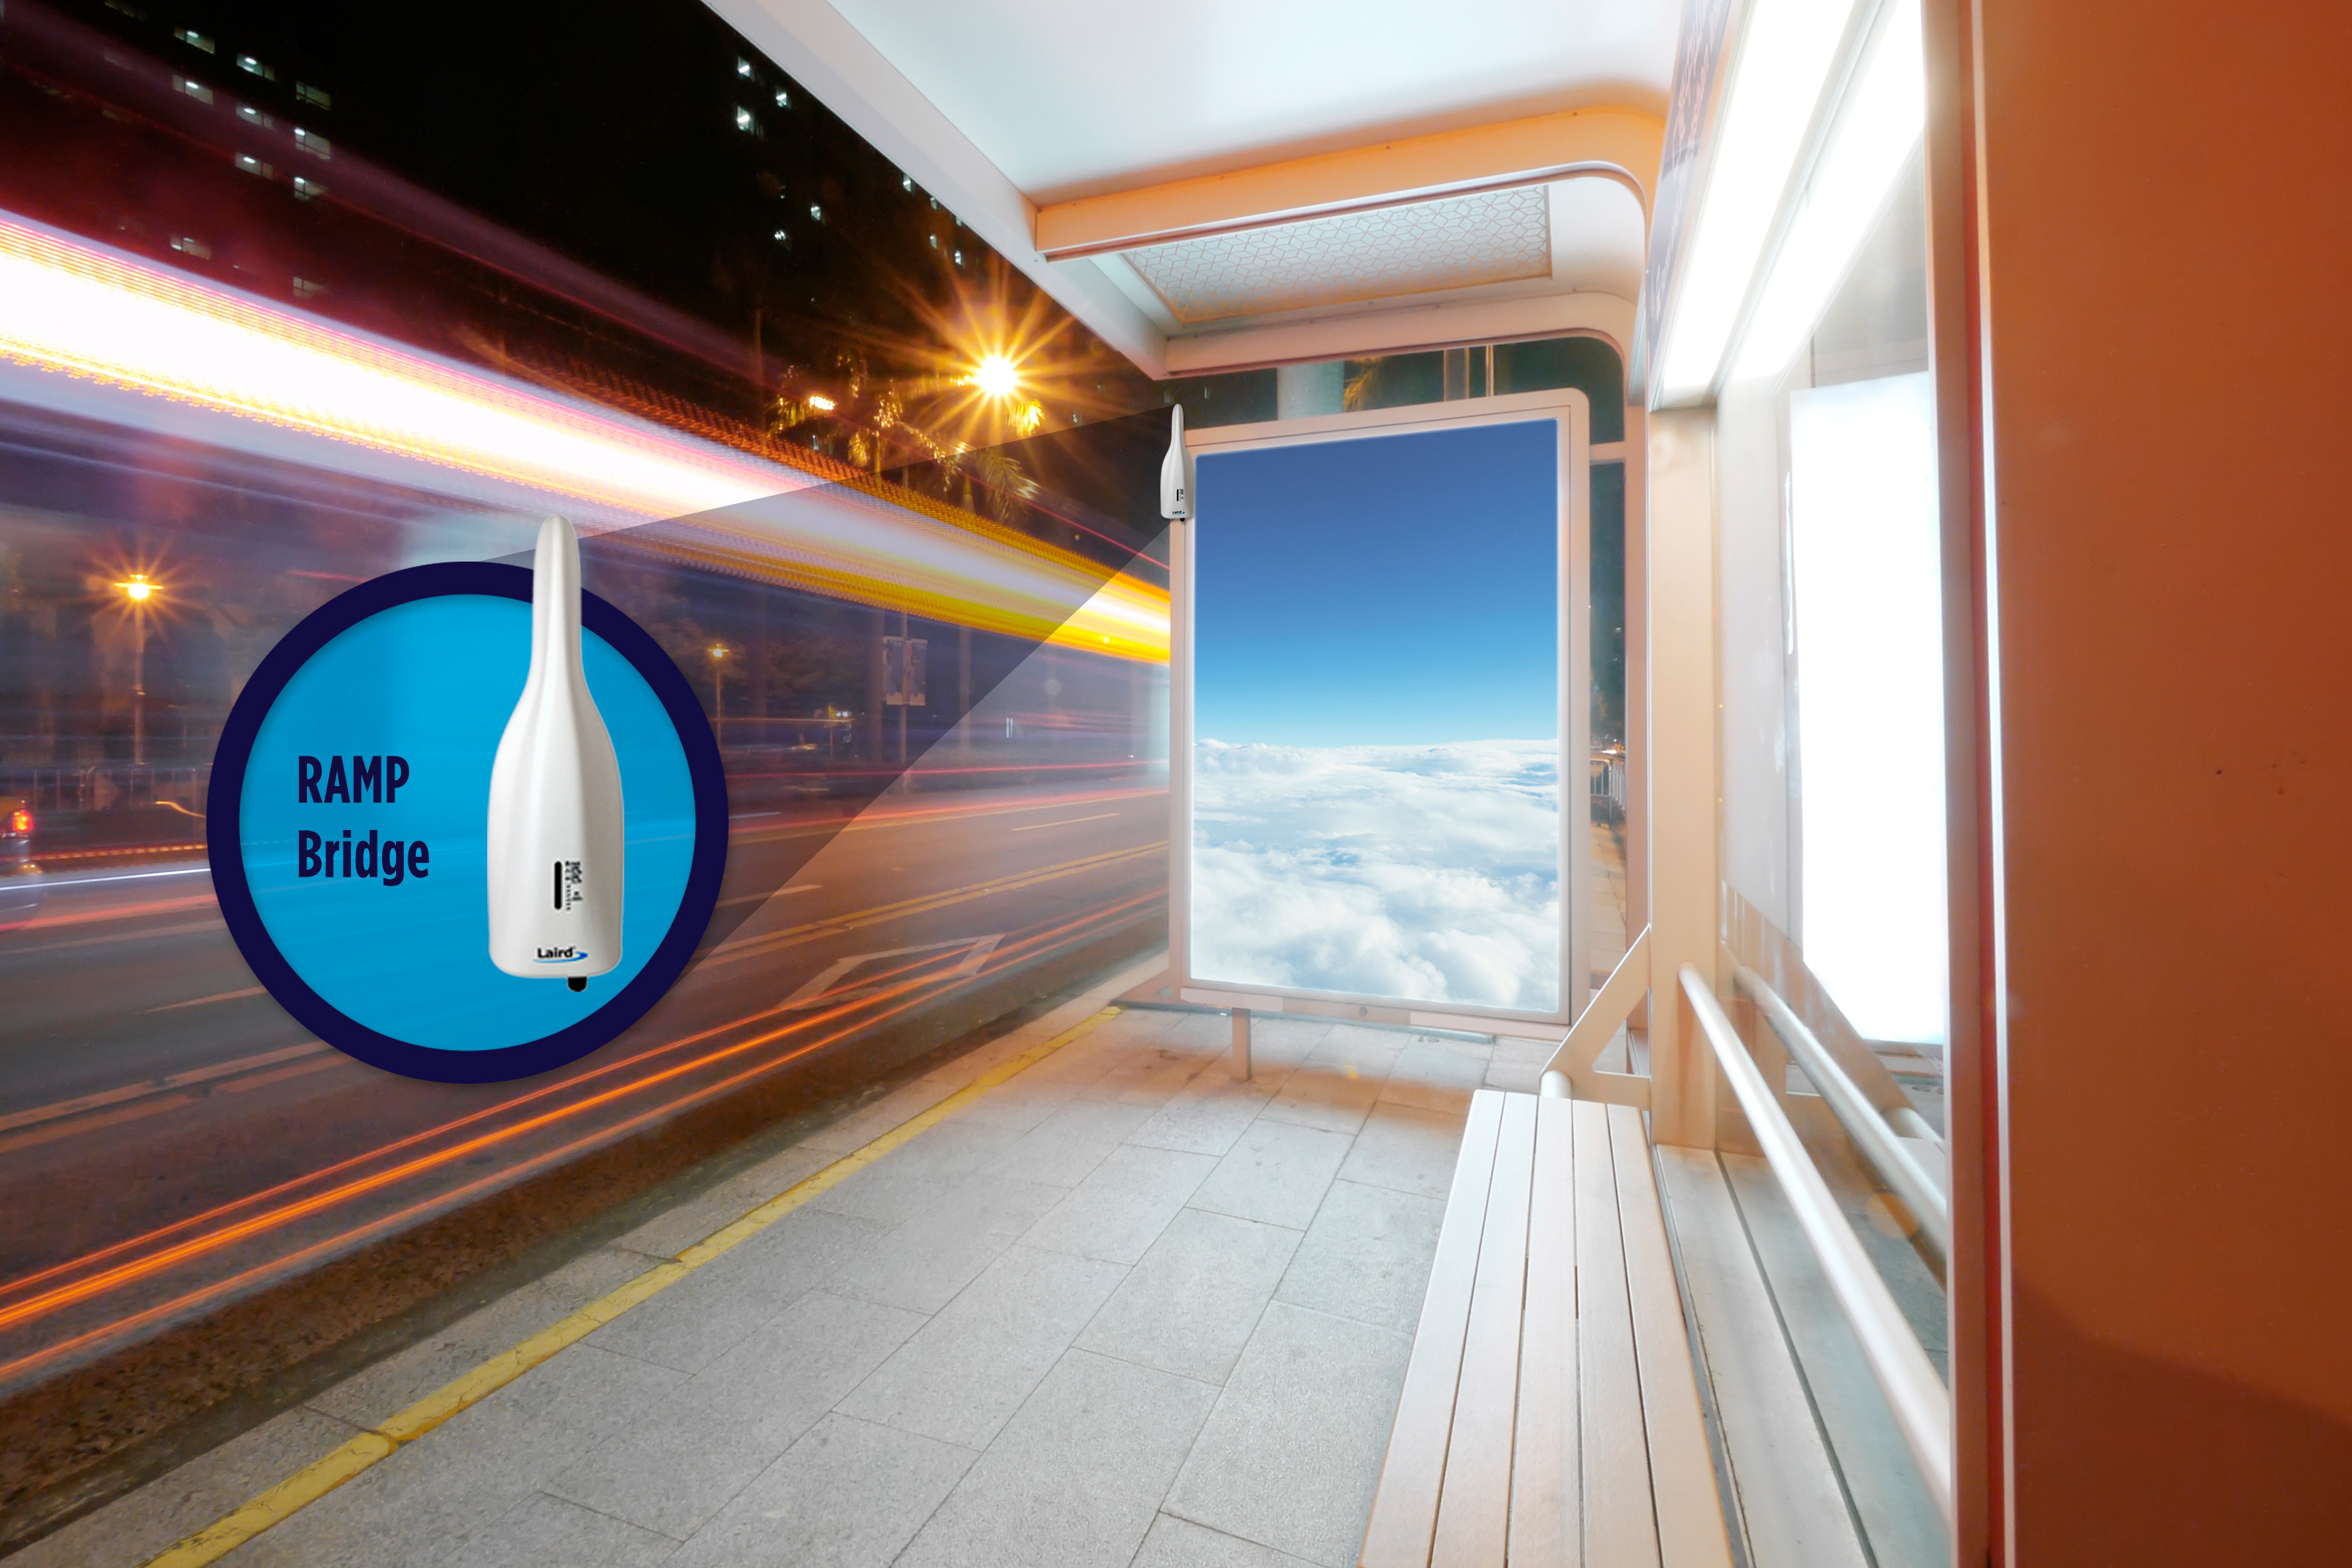 New Wireless Solution From Laird Eliminates Frustrations And Increases Connectivity For Digital Signage and Hospitality Industries